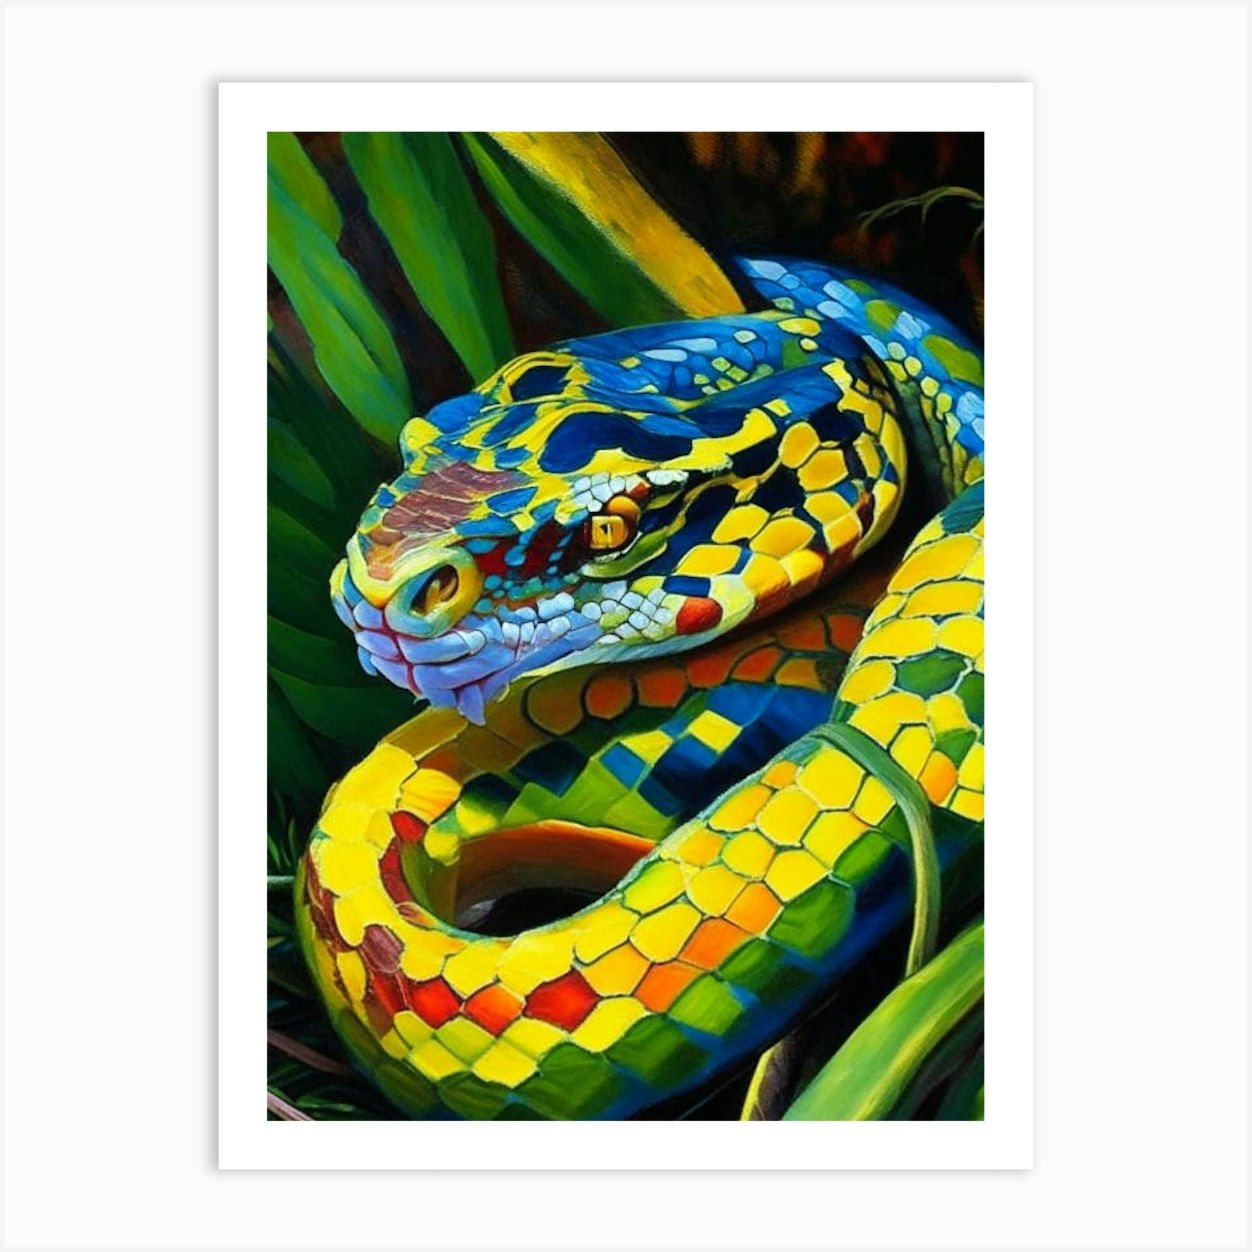 Jamaican Boa Snake Painting Art Print by The Snake Pit - Fy